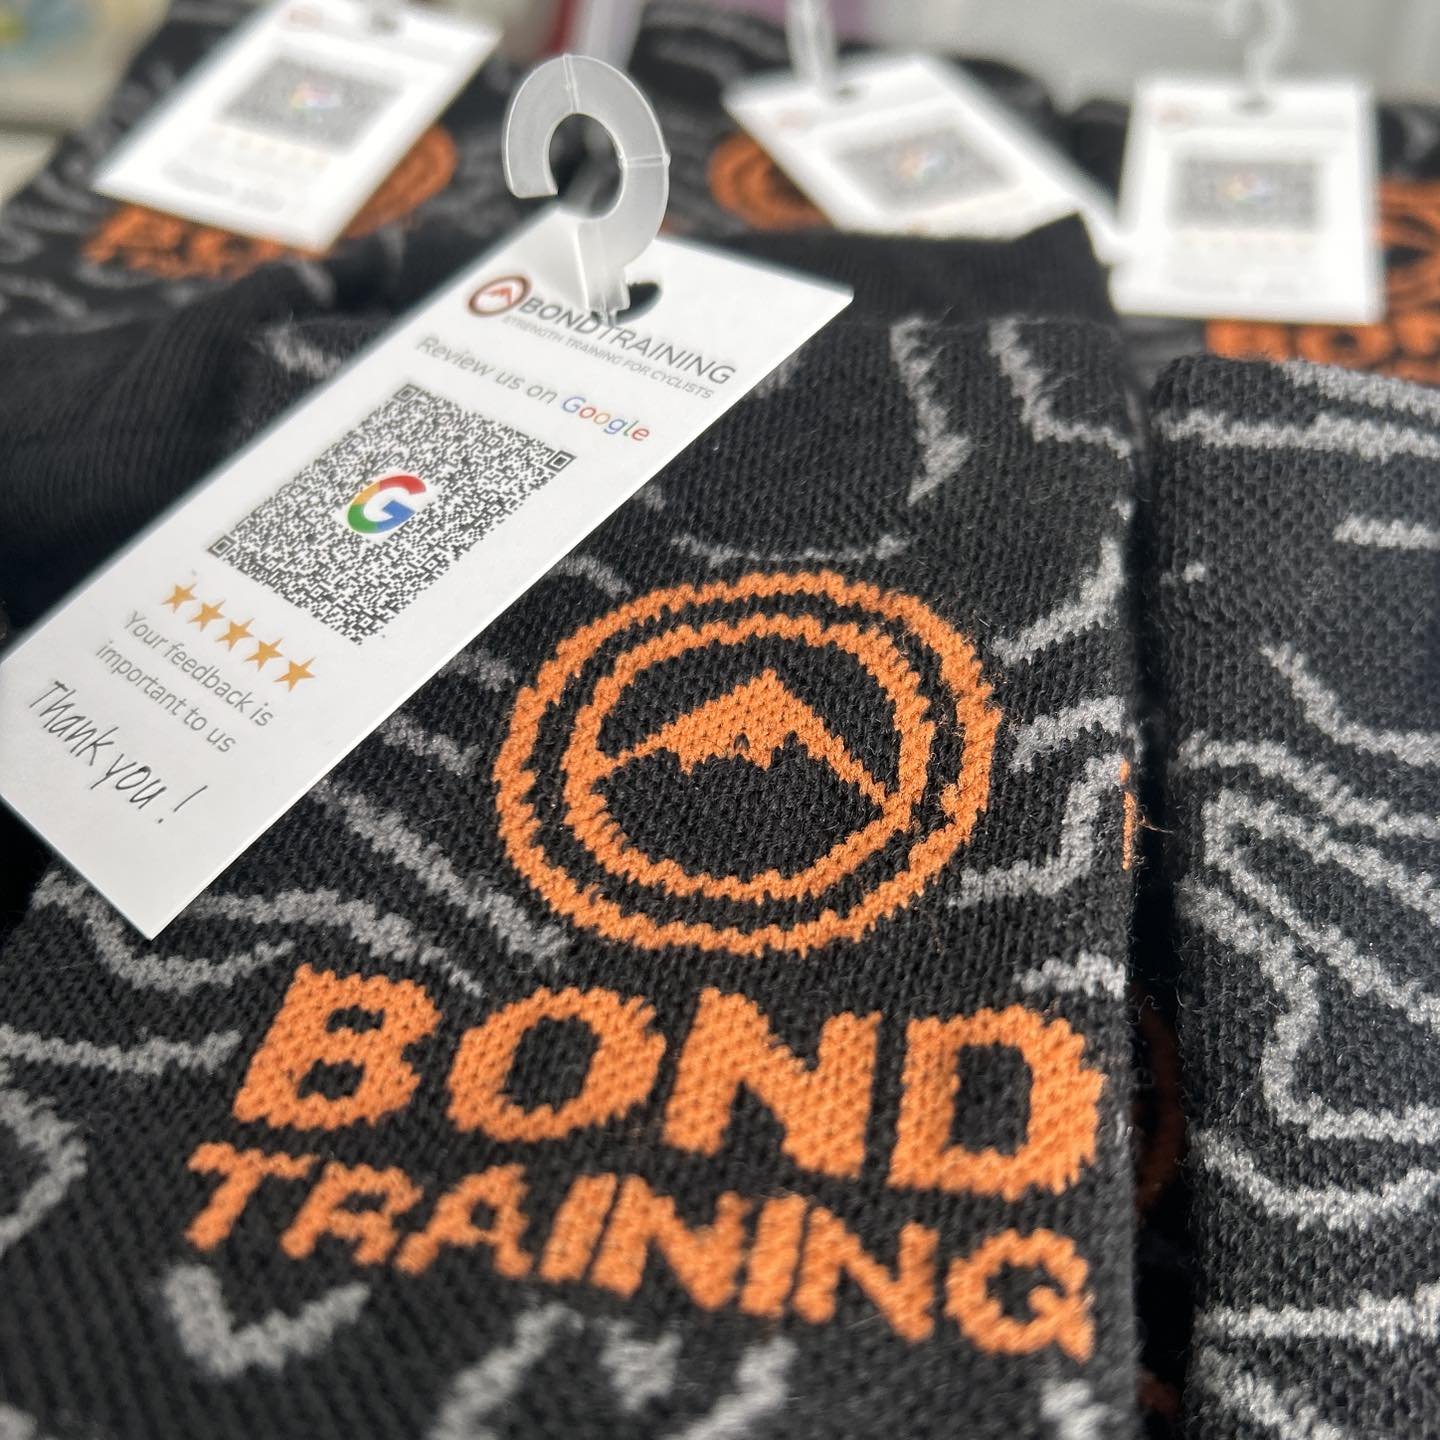 Who doesn&rsquo;t love NEW socks !!!!!!! 

Looking forward to seeing these out on the trails. 

Where will your socks take you? 

#showusyoursocks 
Be sure to Snap it Post it Tag @bondtraining ! 

#mtblife #mtb #cantsorrybikesbye #bondtraining #stren